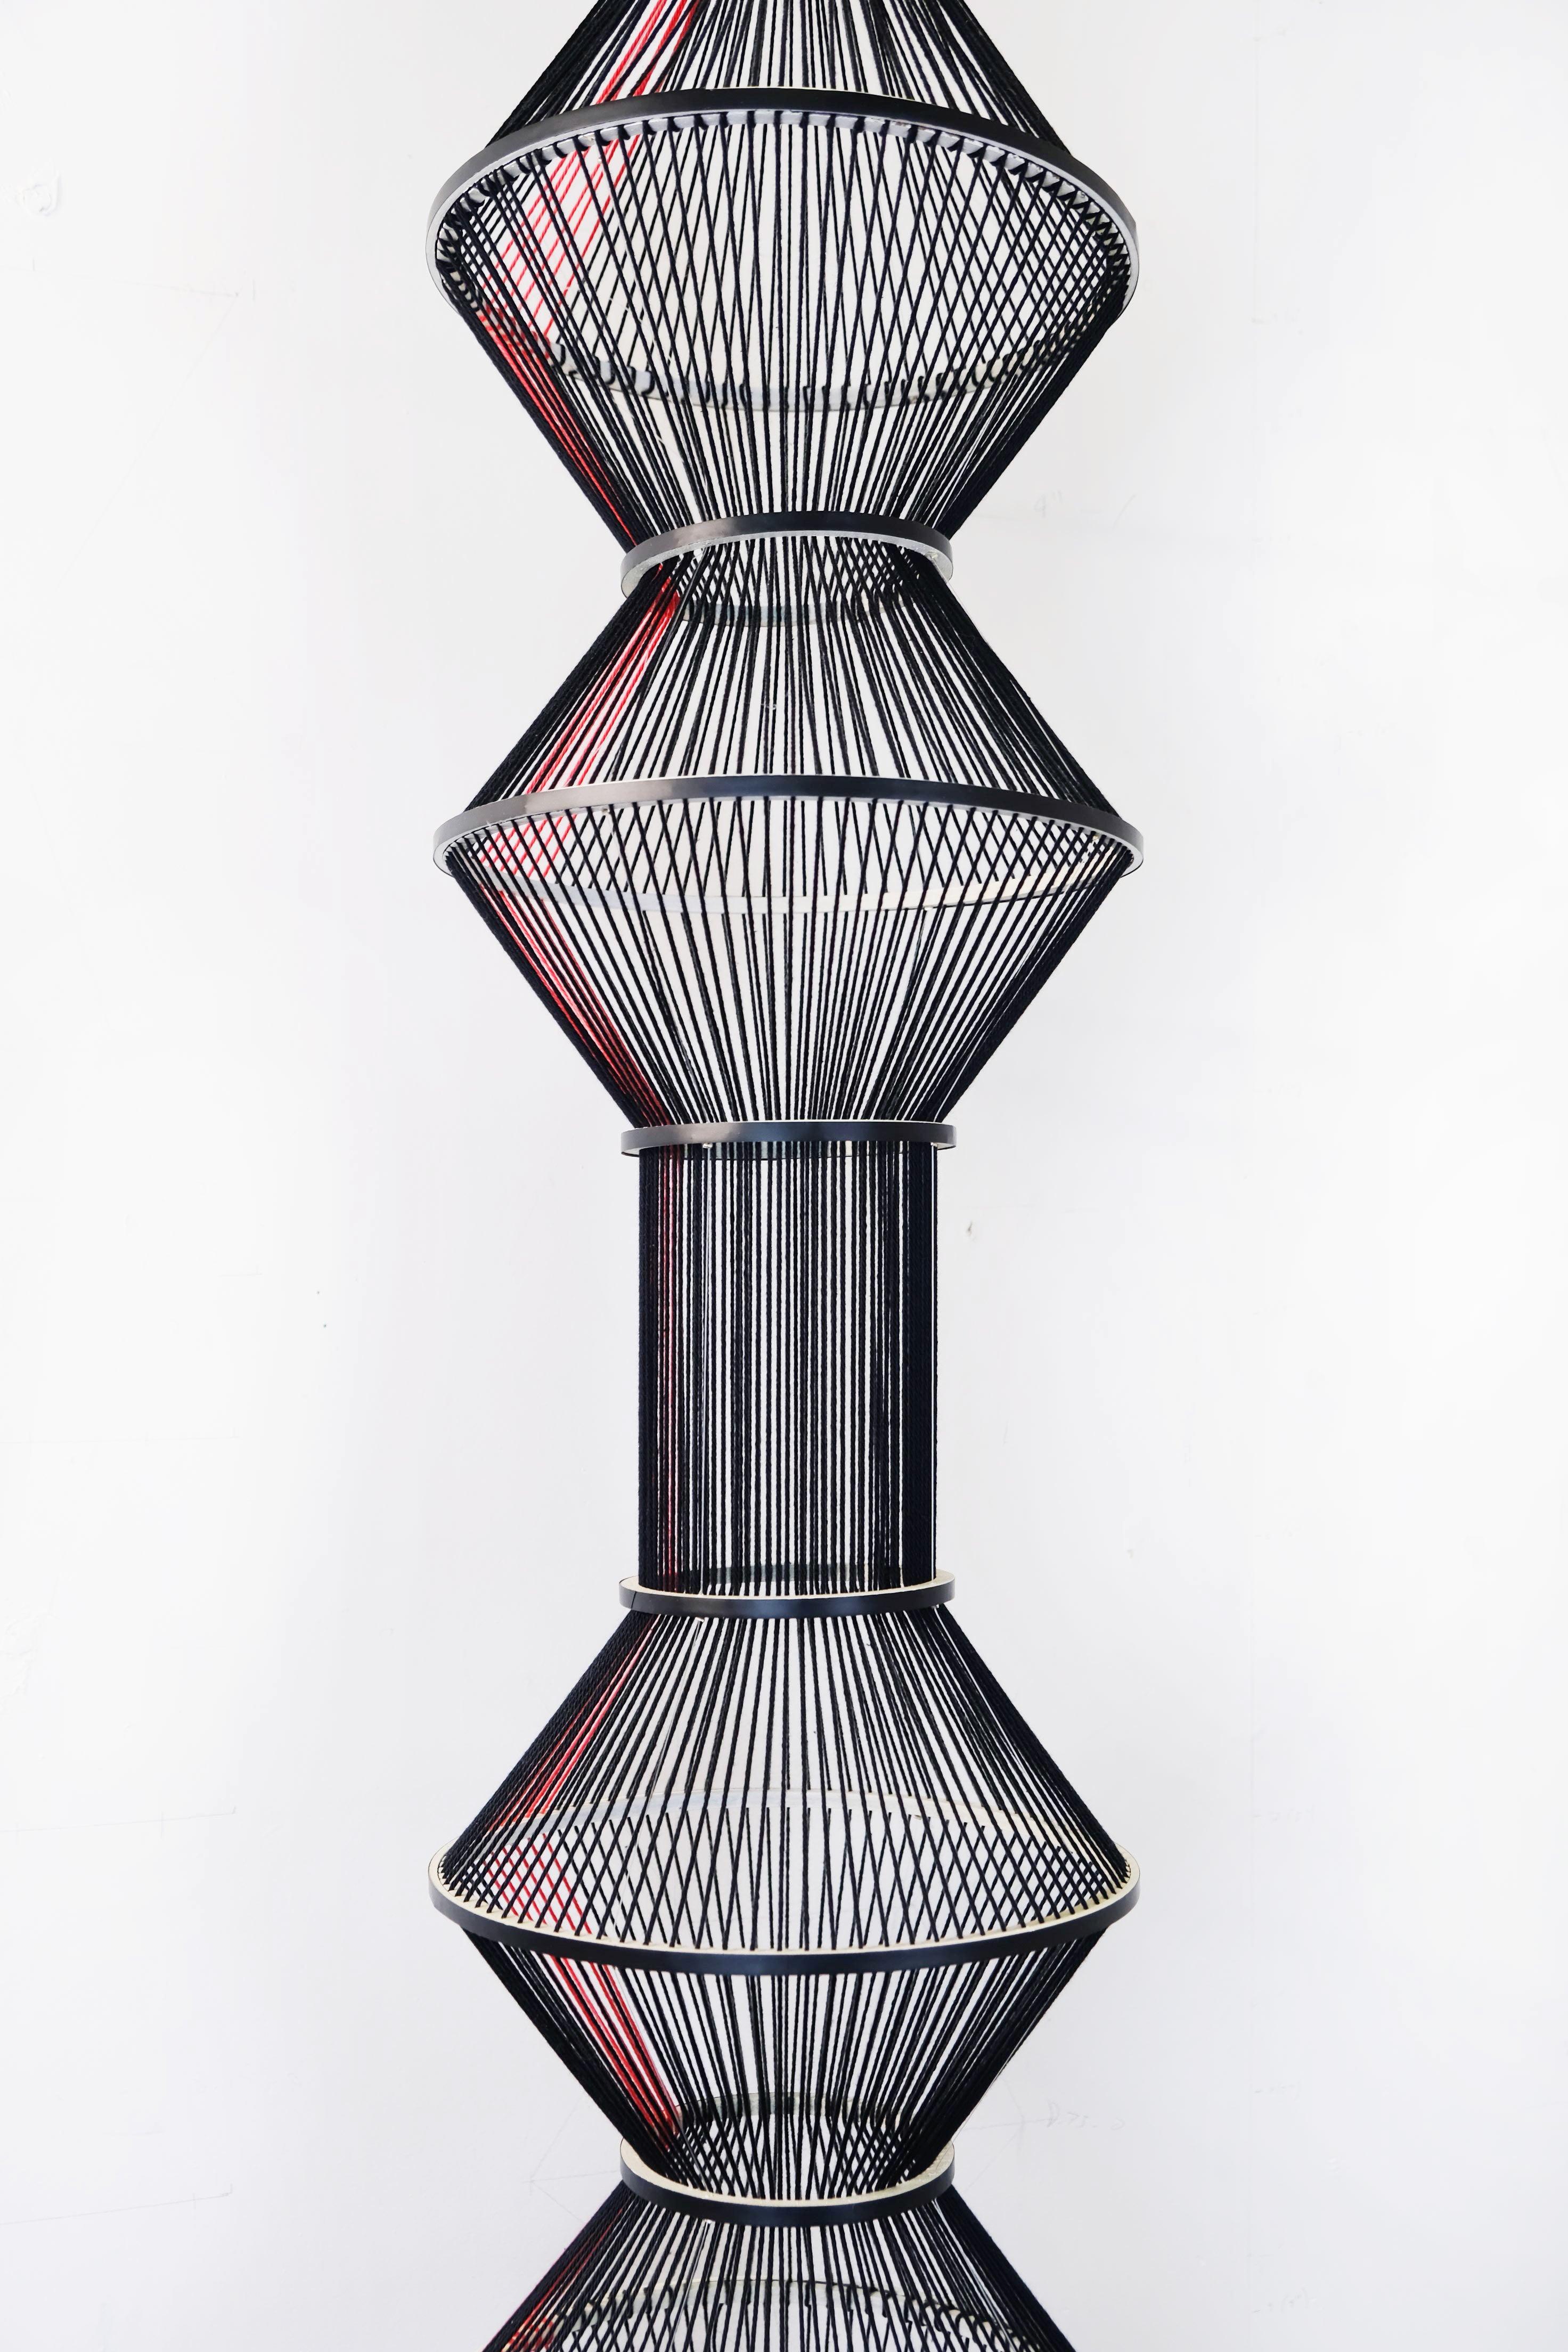 This bold black and red contemporary abstract sculpture is an original artwork by Peruvian-Canadian artist Sofia Escobar. Hundreds of pieces of thread and wool have been carefully handwoven in a delicate exploration of light and form. This dynamic